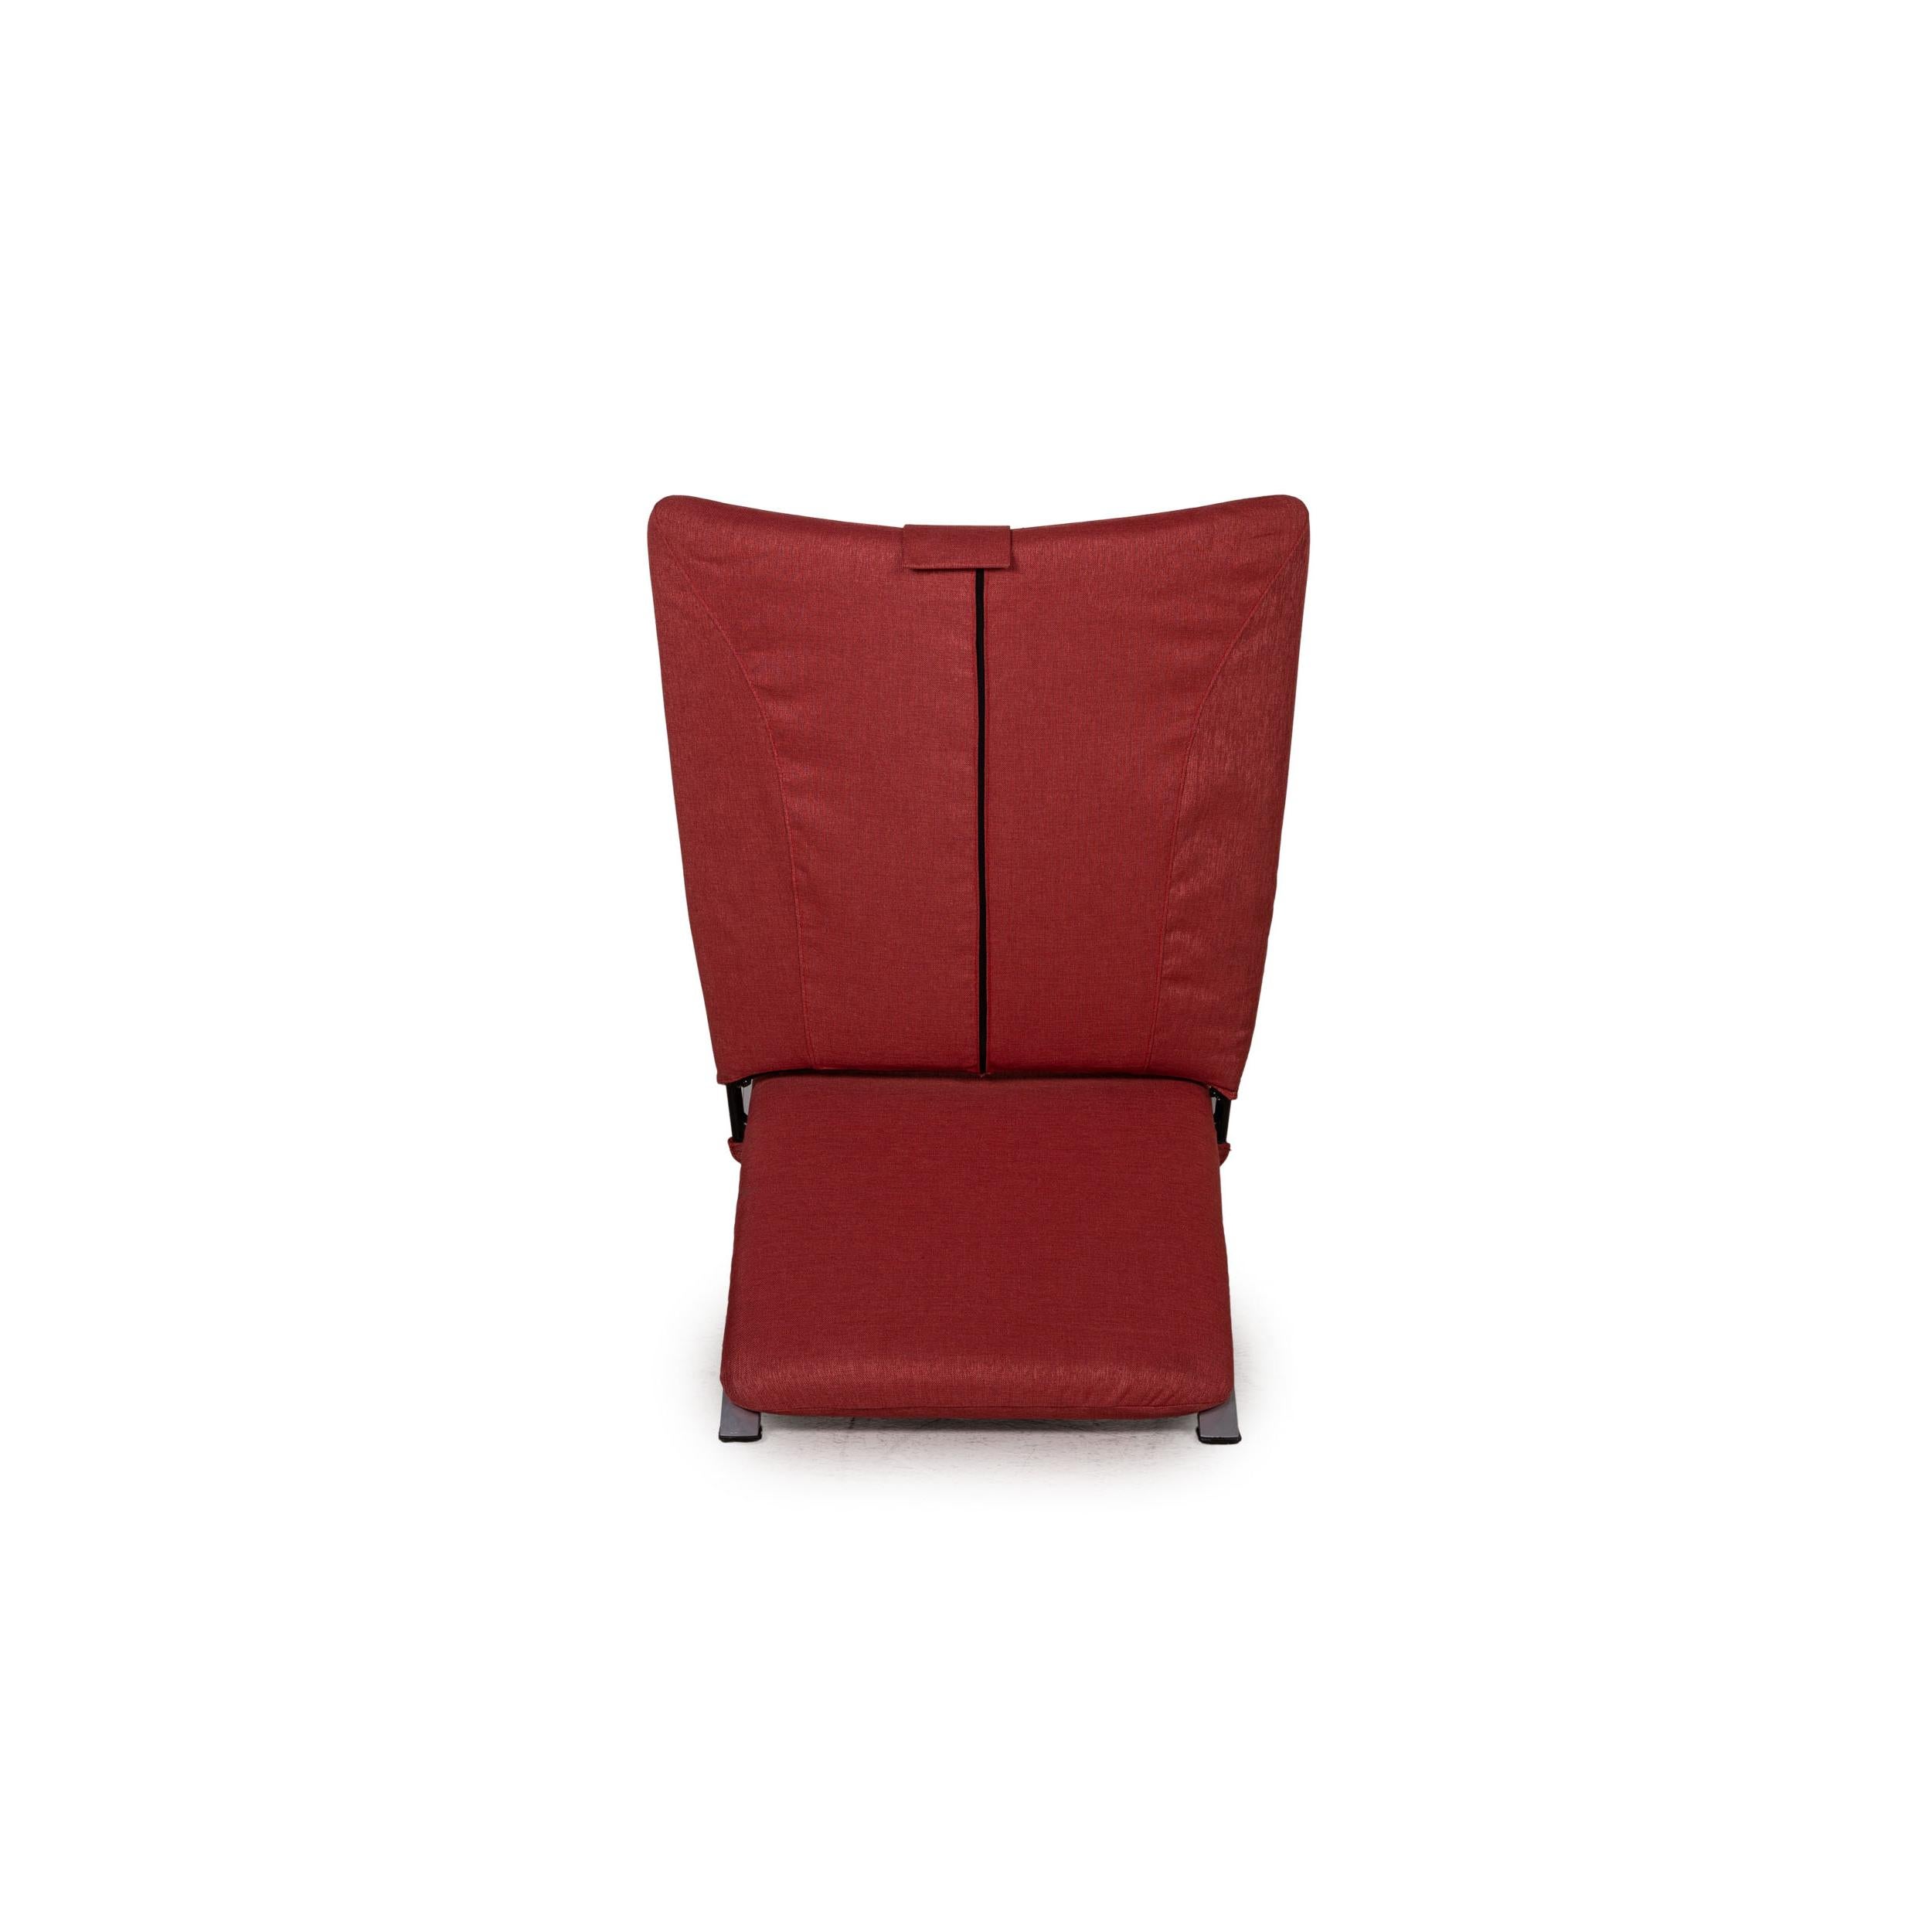 Contemporary WK Wohnen Spot 698 Armchair Fabric Red Function Relaxation Function For Sale